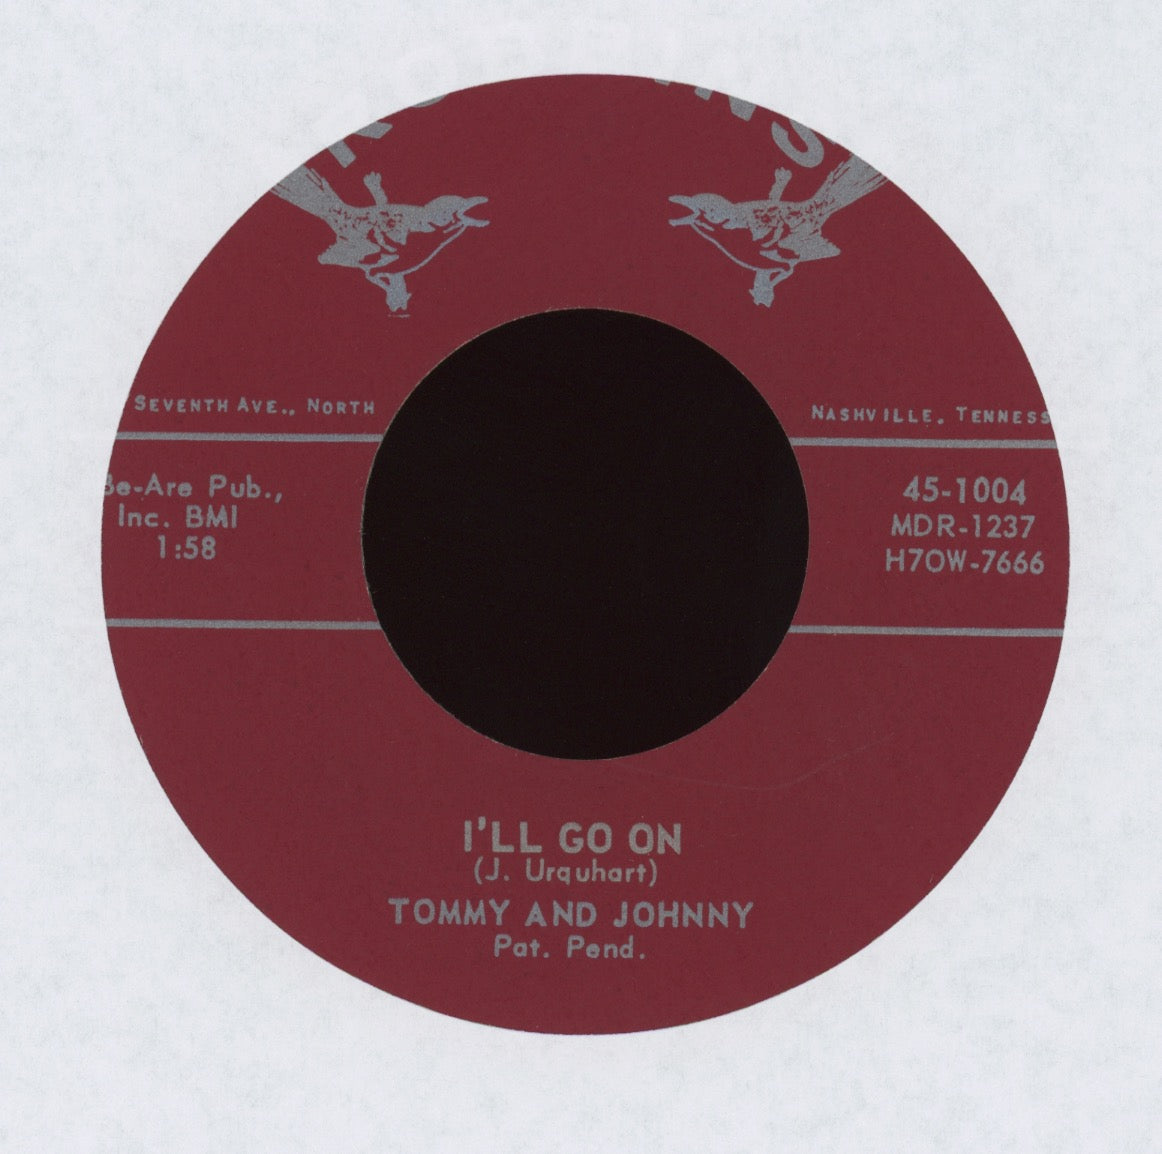 Tommy and Johnny - I'll Go On on Robbins